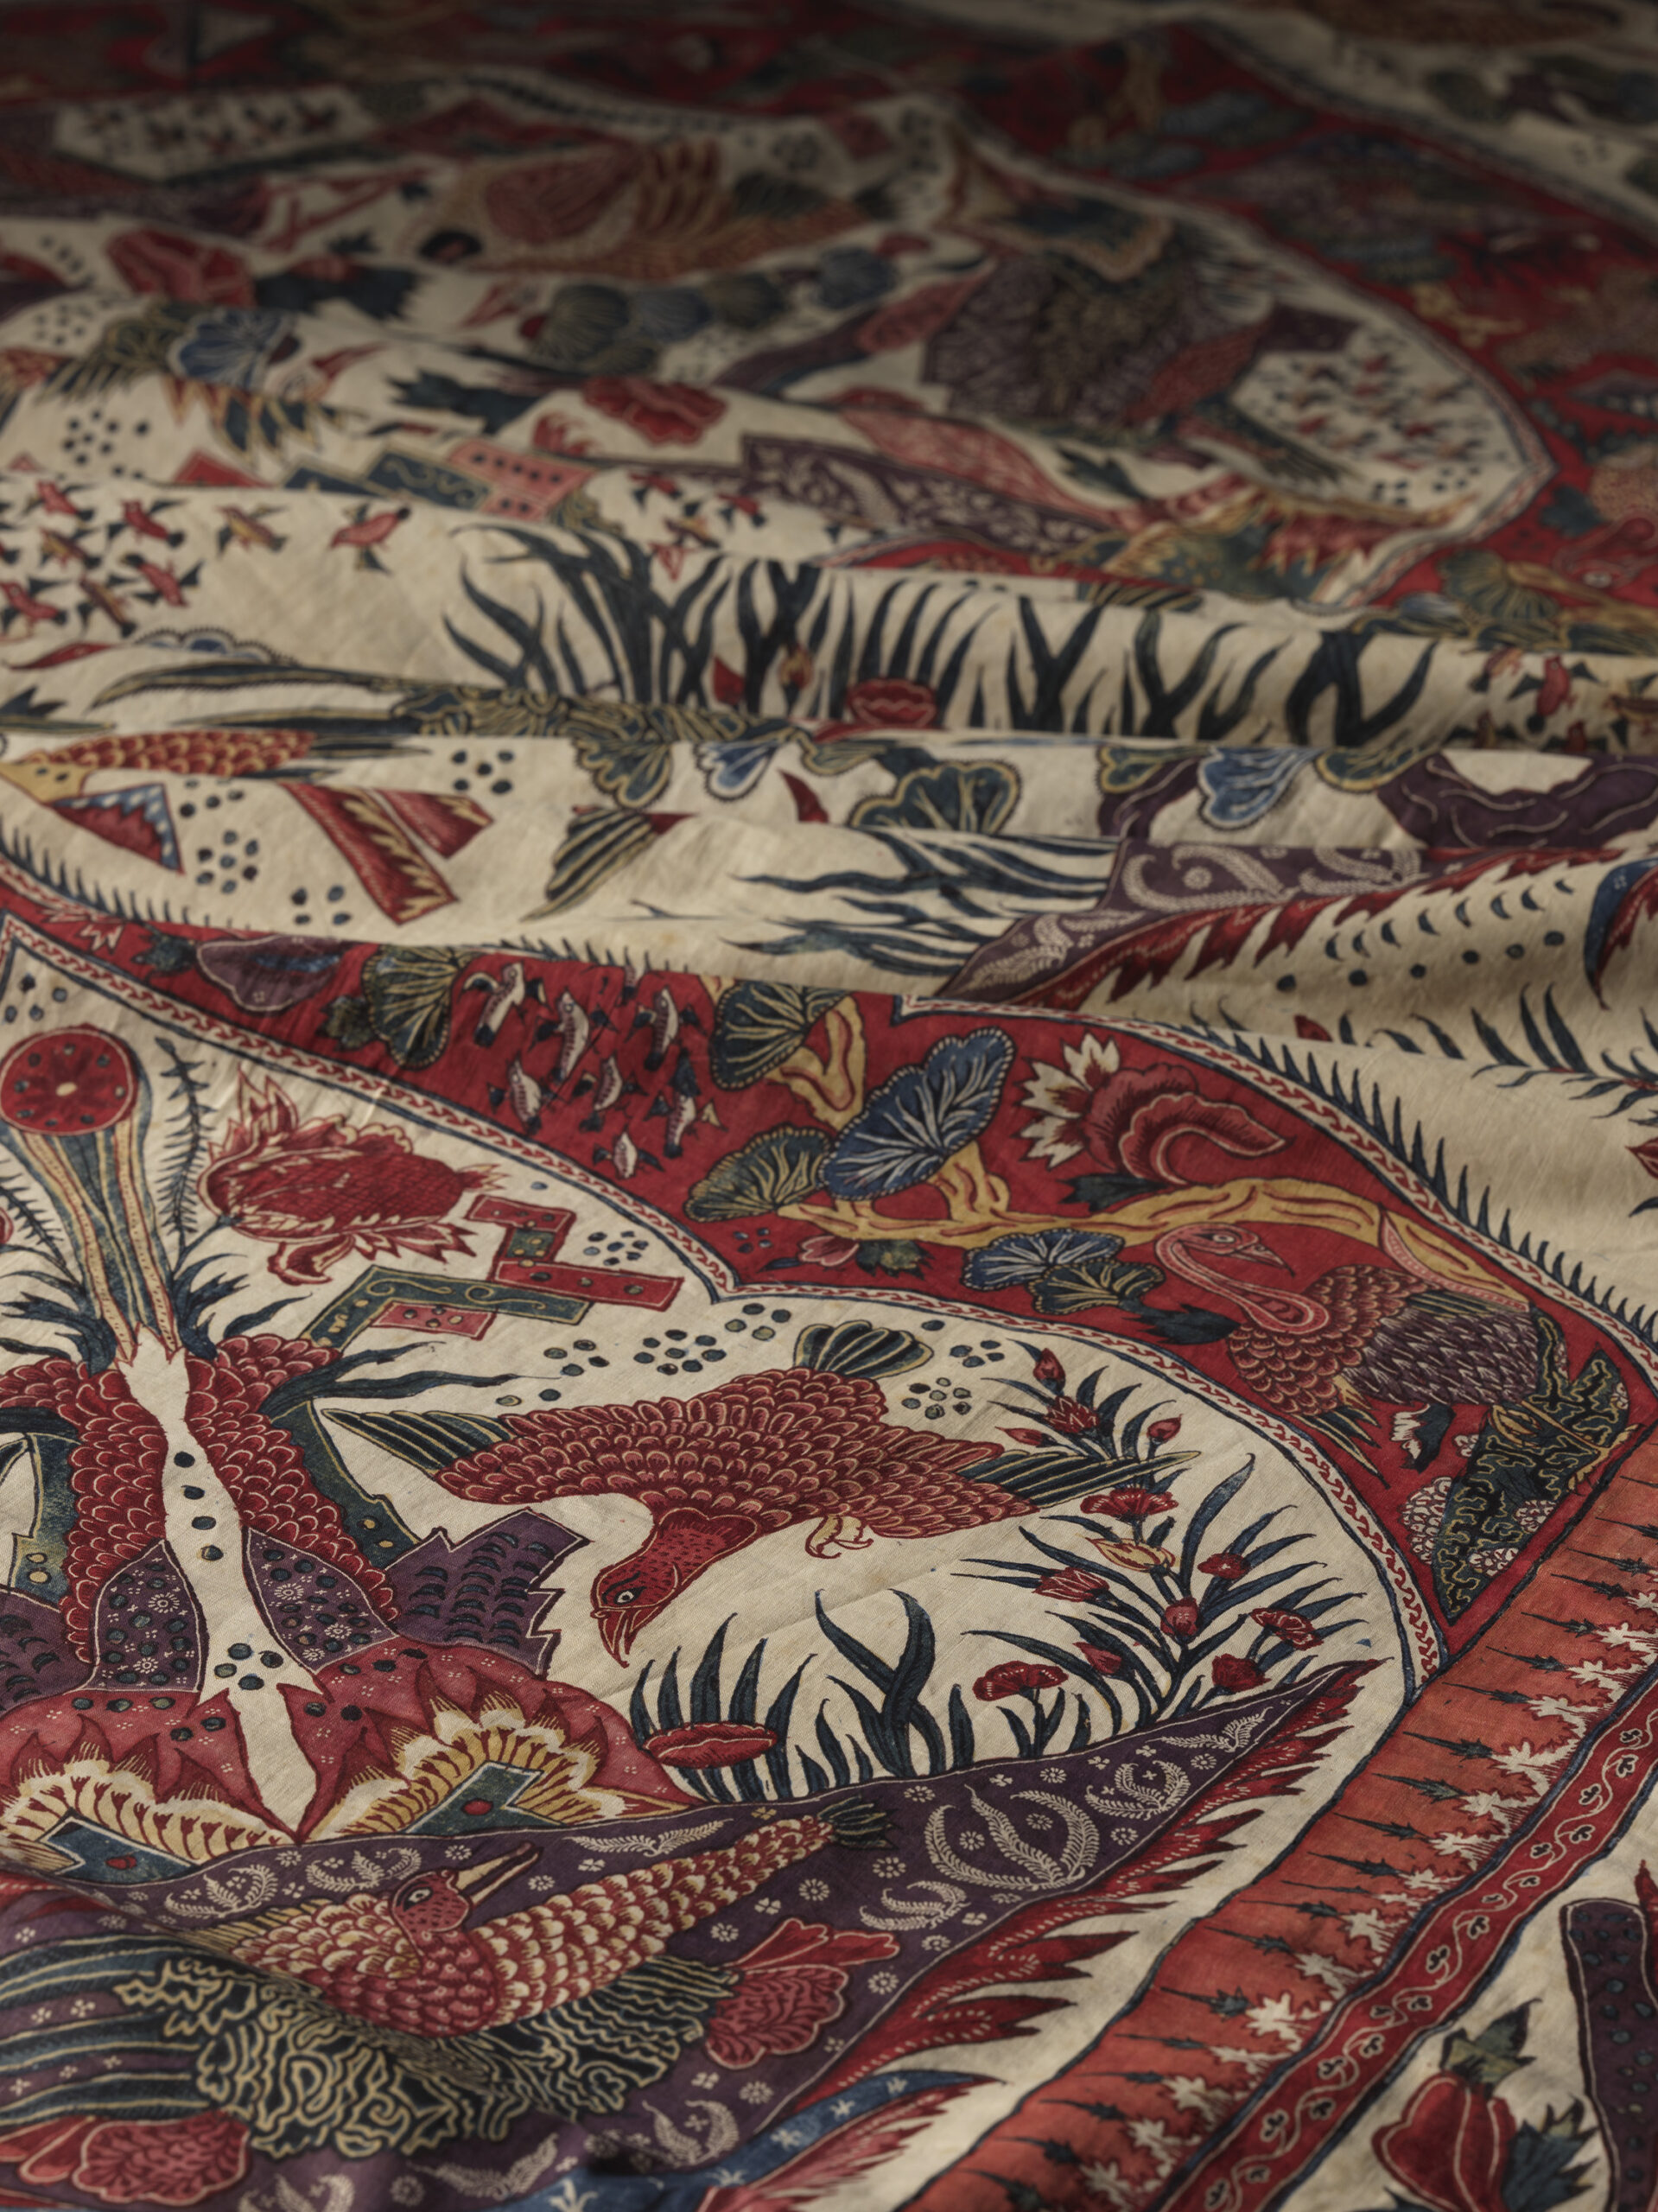 The Cloth That Changed the World: India’s Painted and Printed Cottons